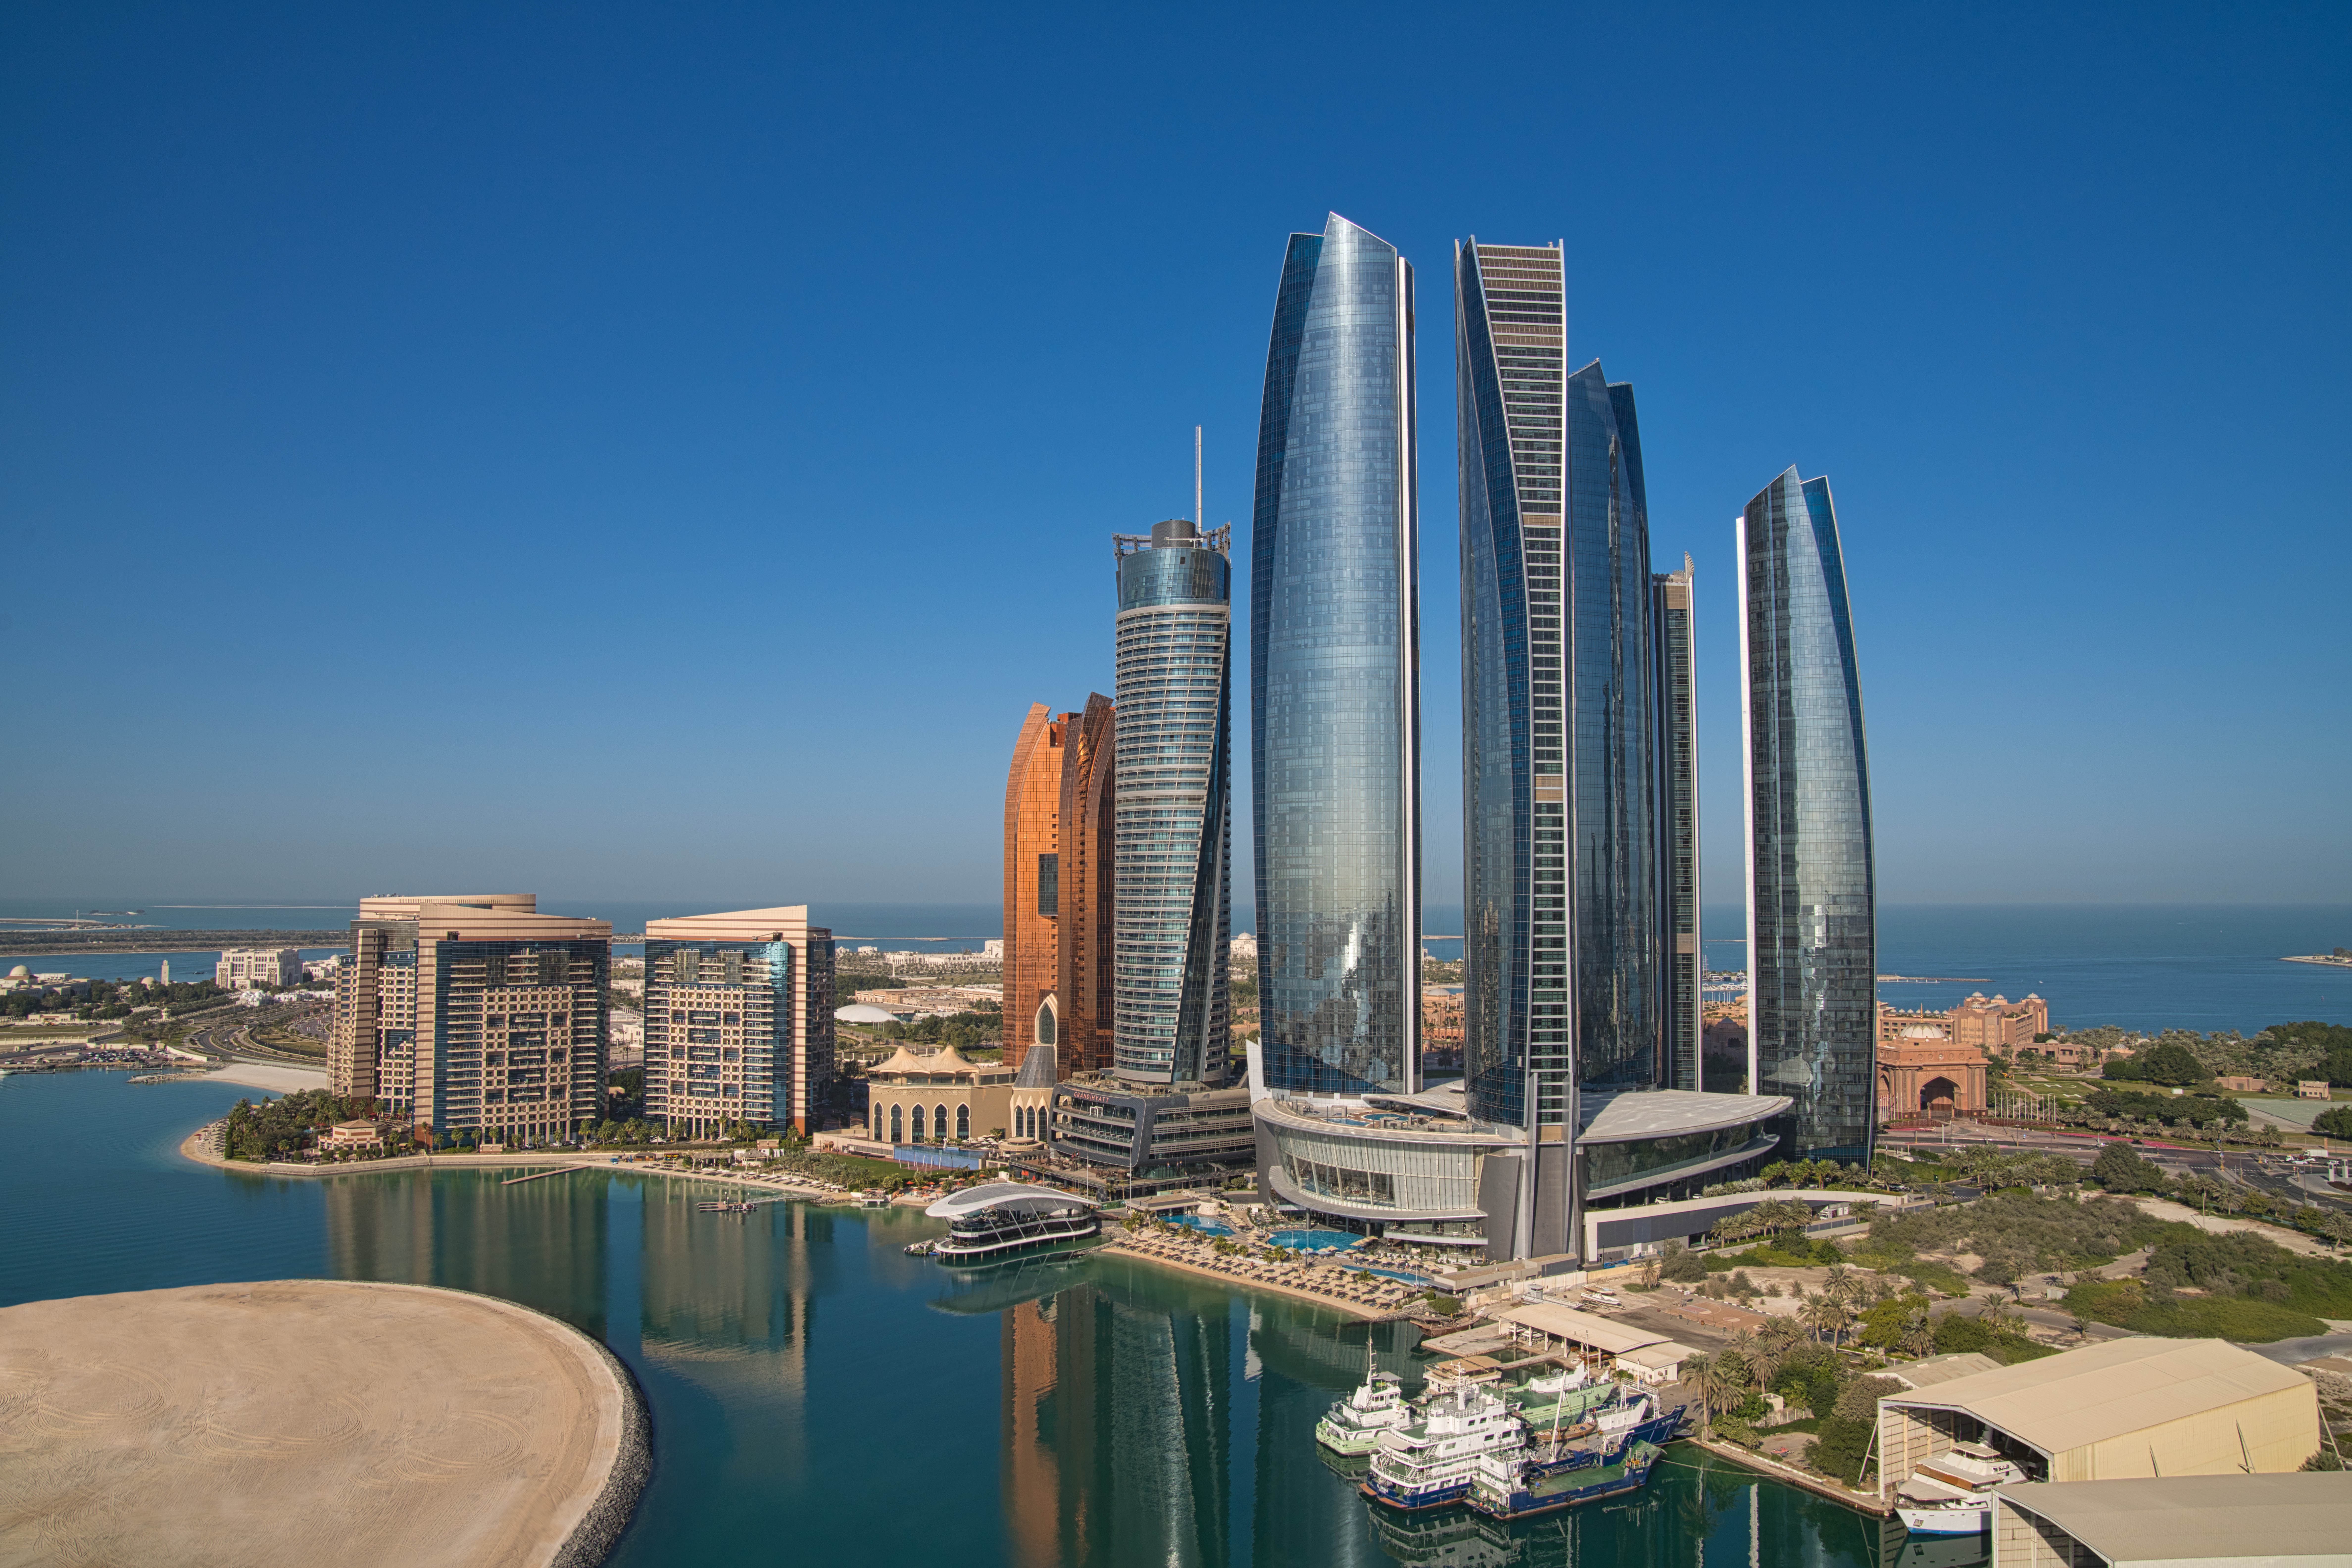 Conrad Abu Dhabi-etihad-towers view with the water and surrounding buildings